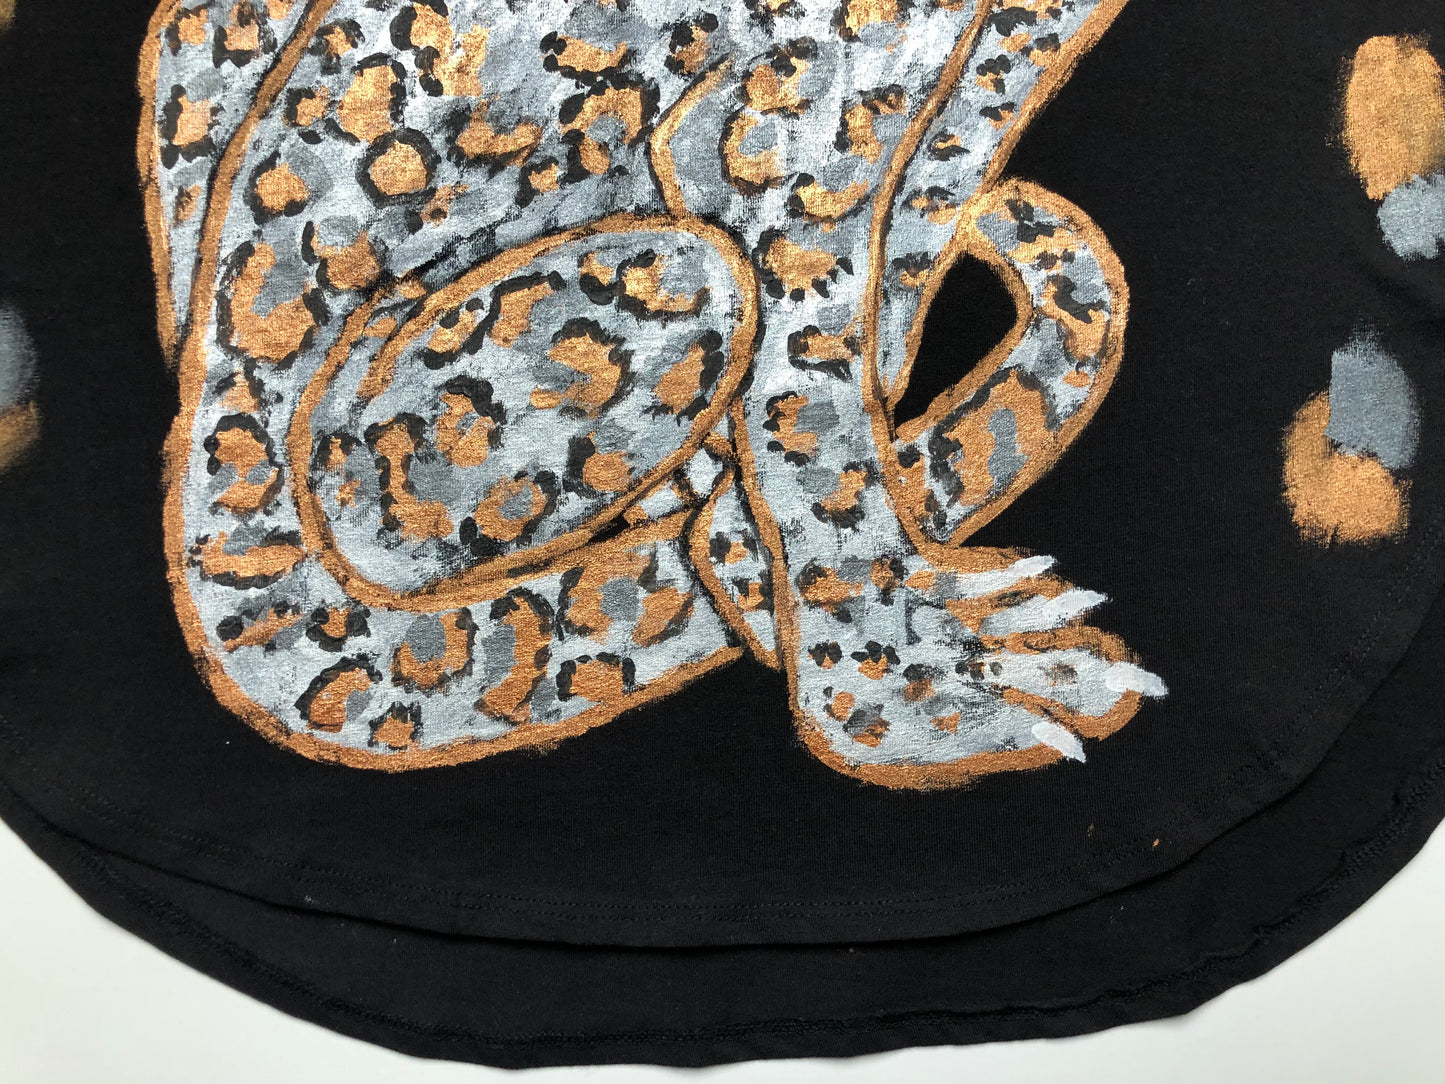 Bottom of the t-shirt with leopard legs and claws